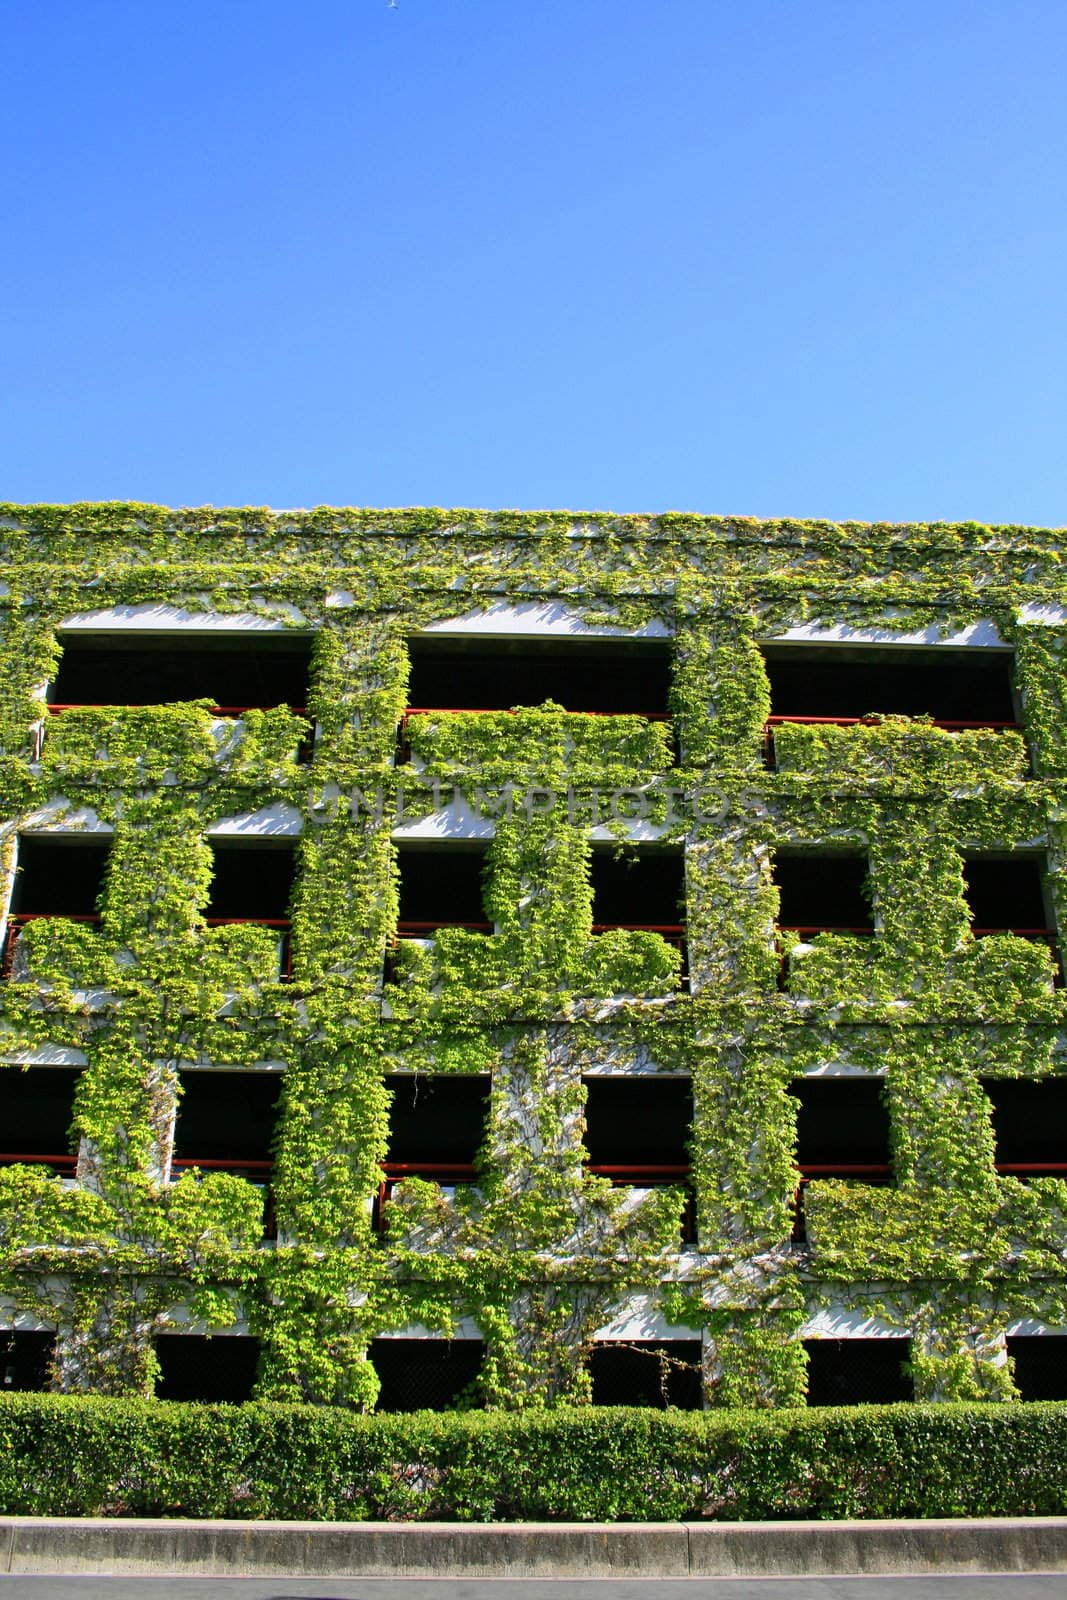 Ivy Covered Building by MichaelFelix